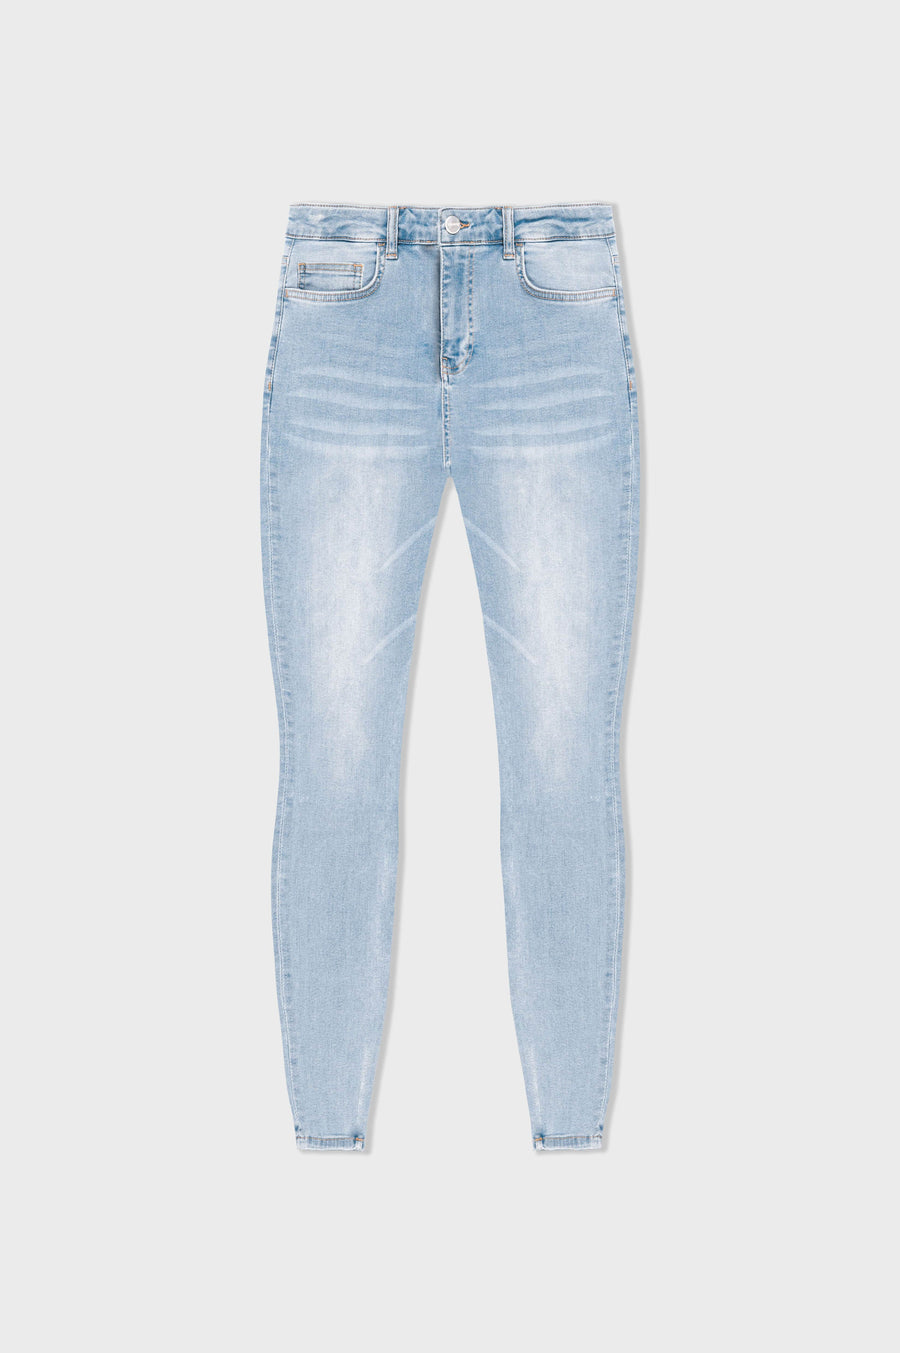 Legend London Jeans - spray on STONE WASHED SPRAY ON JEANS - NON RIPPED